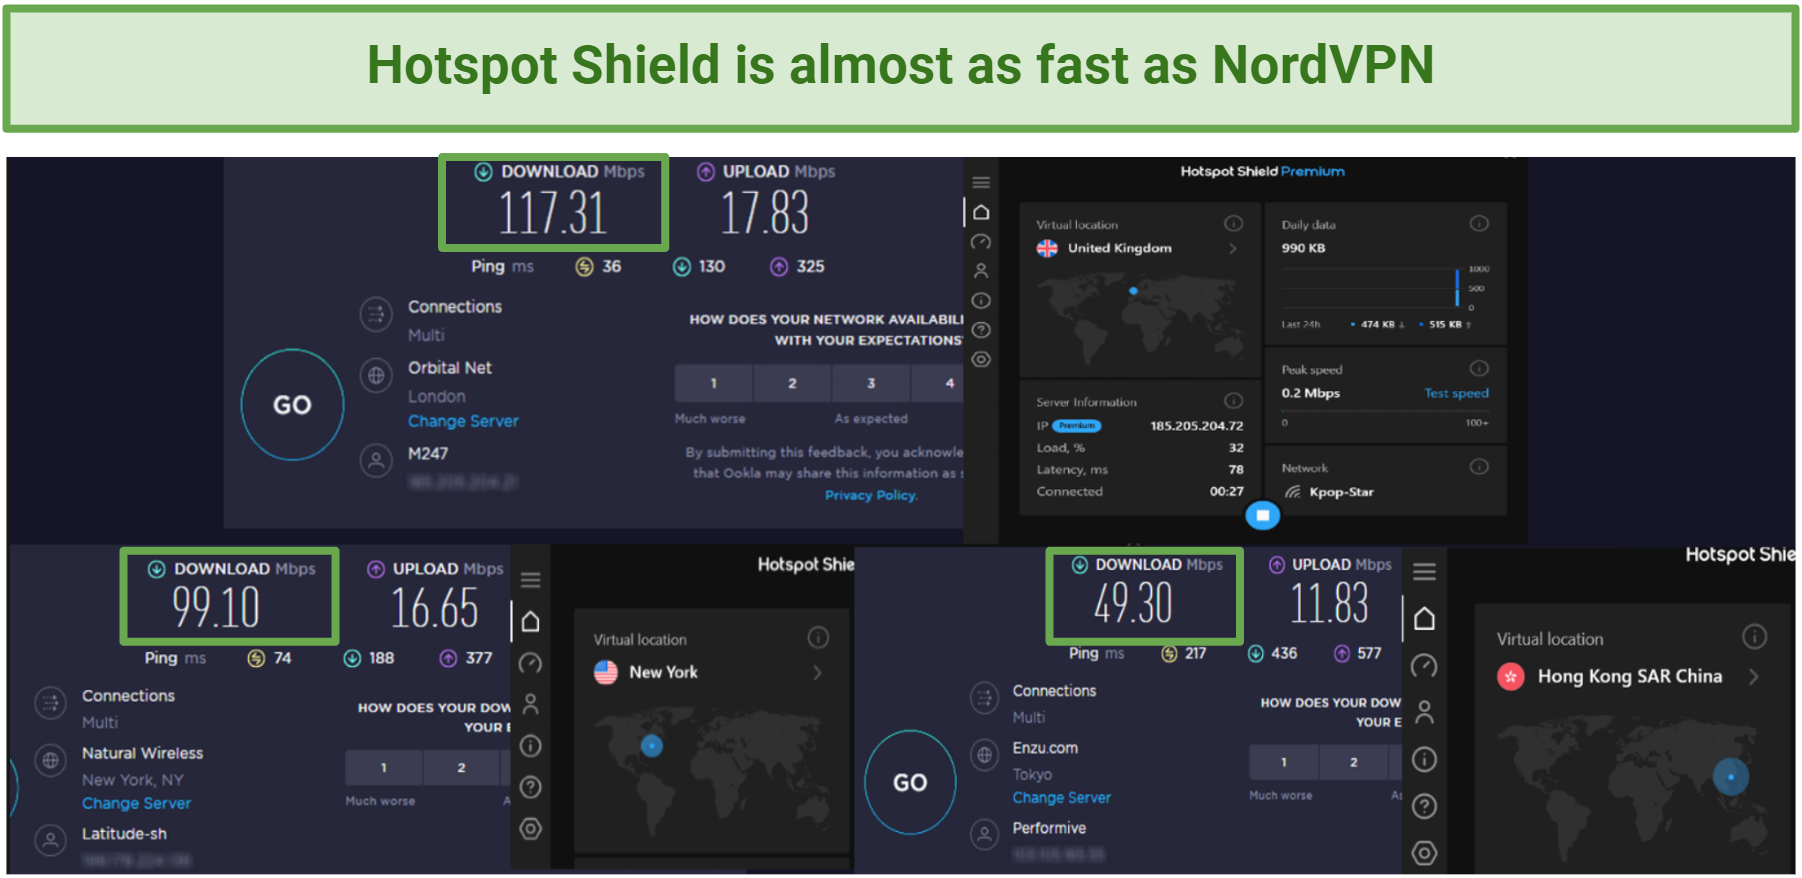 Pictures of Hotspot Shield speed tests results on servers in the US, UK, and Hong Kong